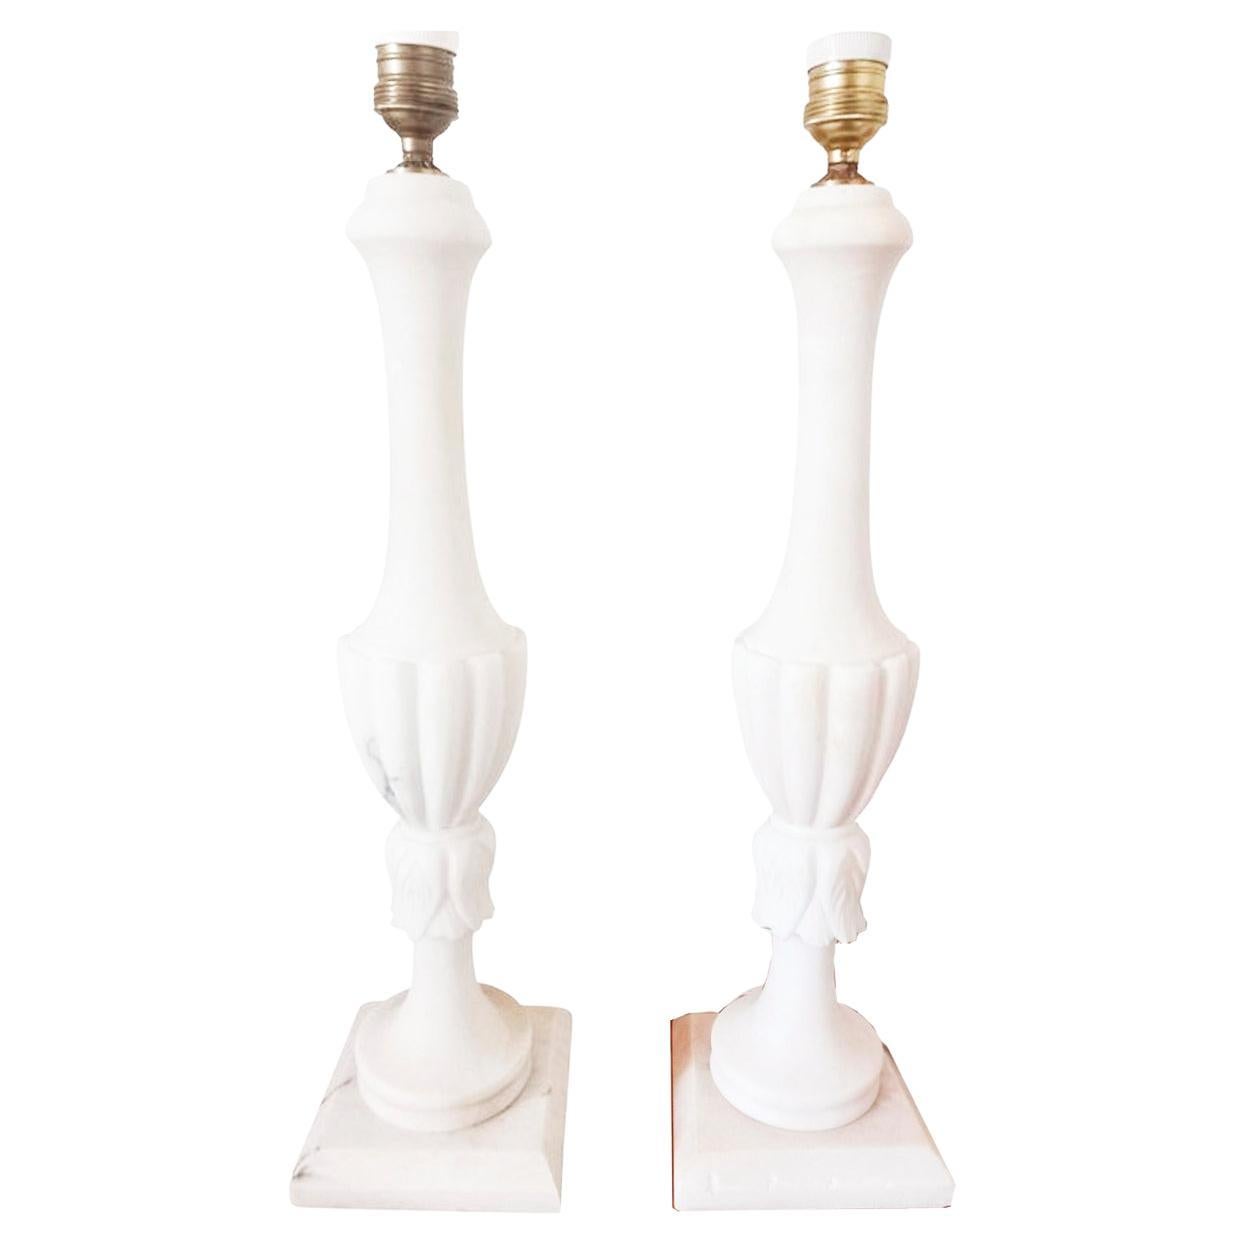  Extra Large Alabaster or Mrble Table Lamps  White Color 57 cm (without screens)